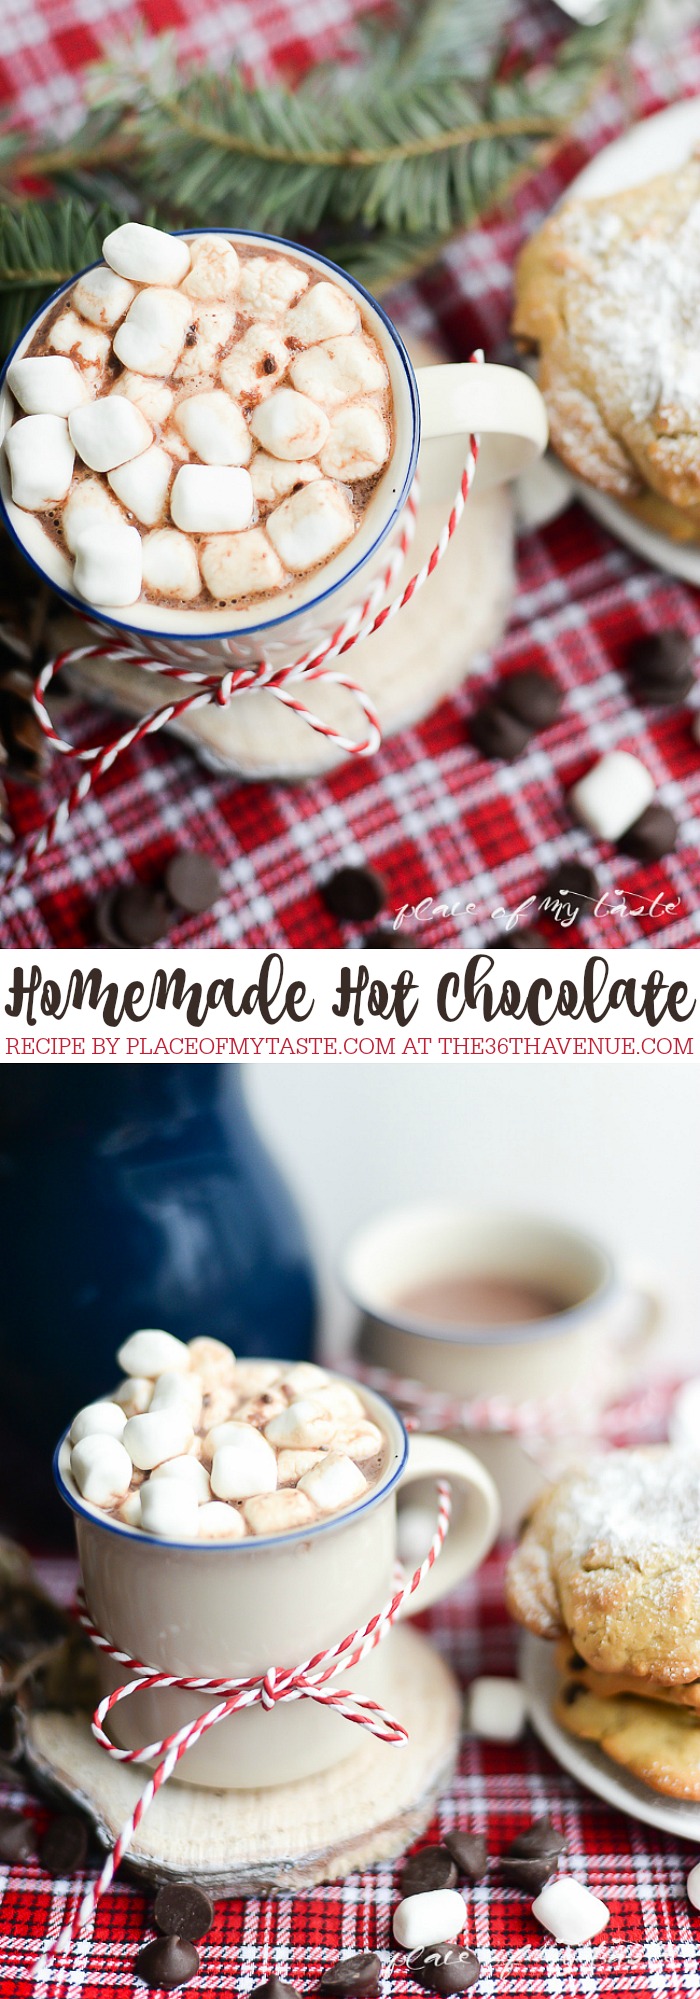 Hot Chocolate Recipe - Homemade Hot Chocolate is seriously the best! This easy recipe will for sure become a favorite hot drink during Christmas and those cold winter days. PIN IT NOW and drink it later!